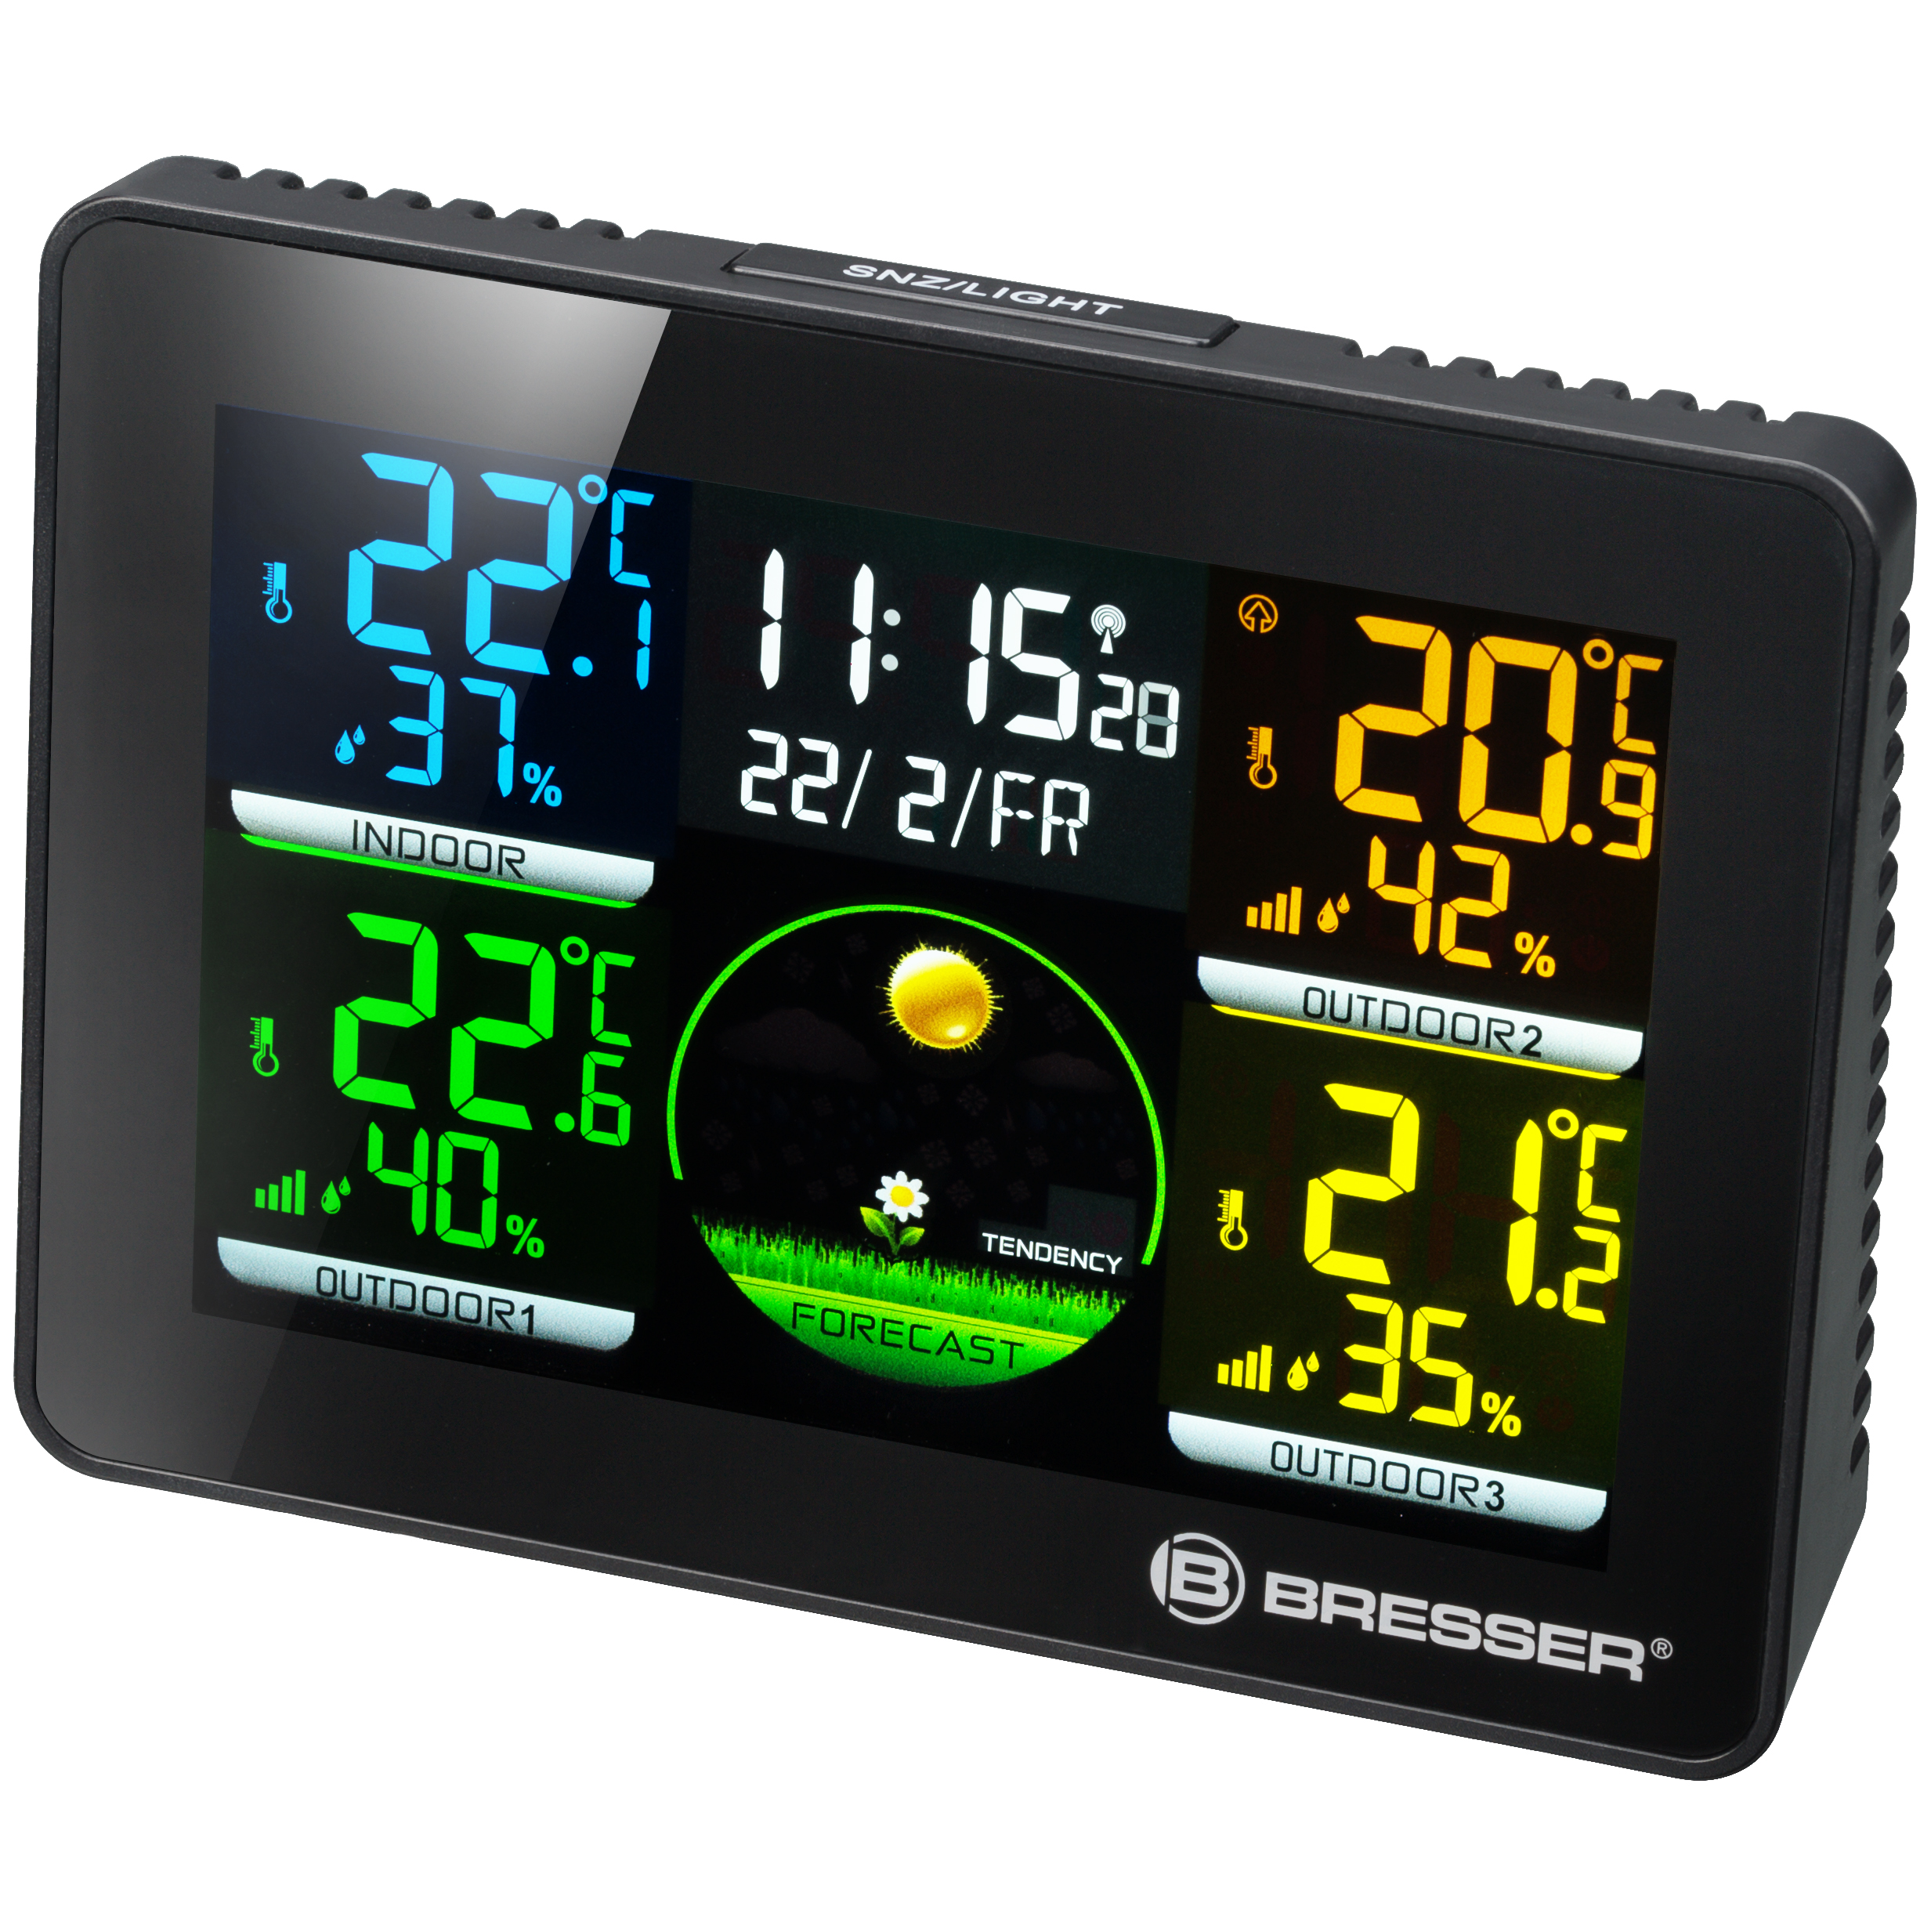 BRESSER Thermo Hygro Quadro NLX - Thermo-Hygrometer with 3 Outdoor Sensors